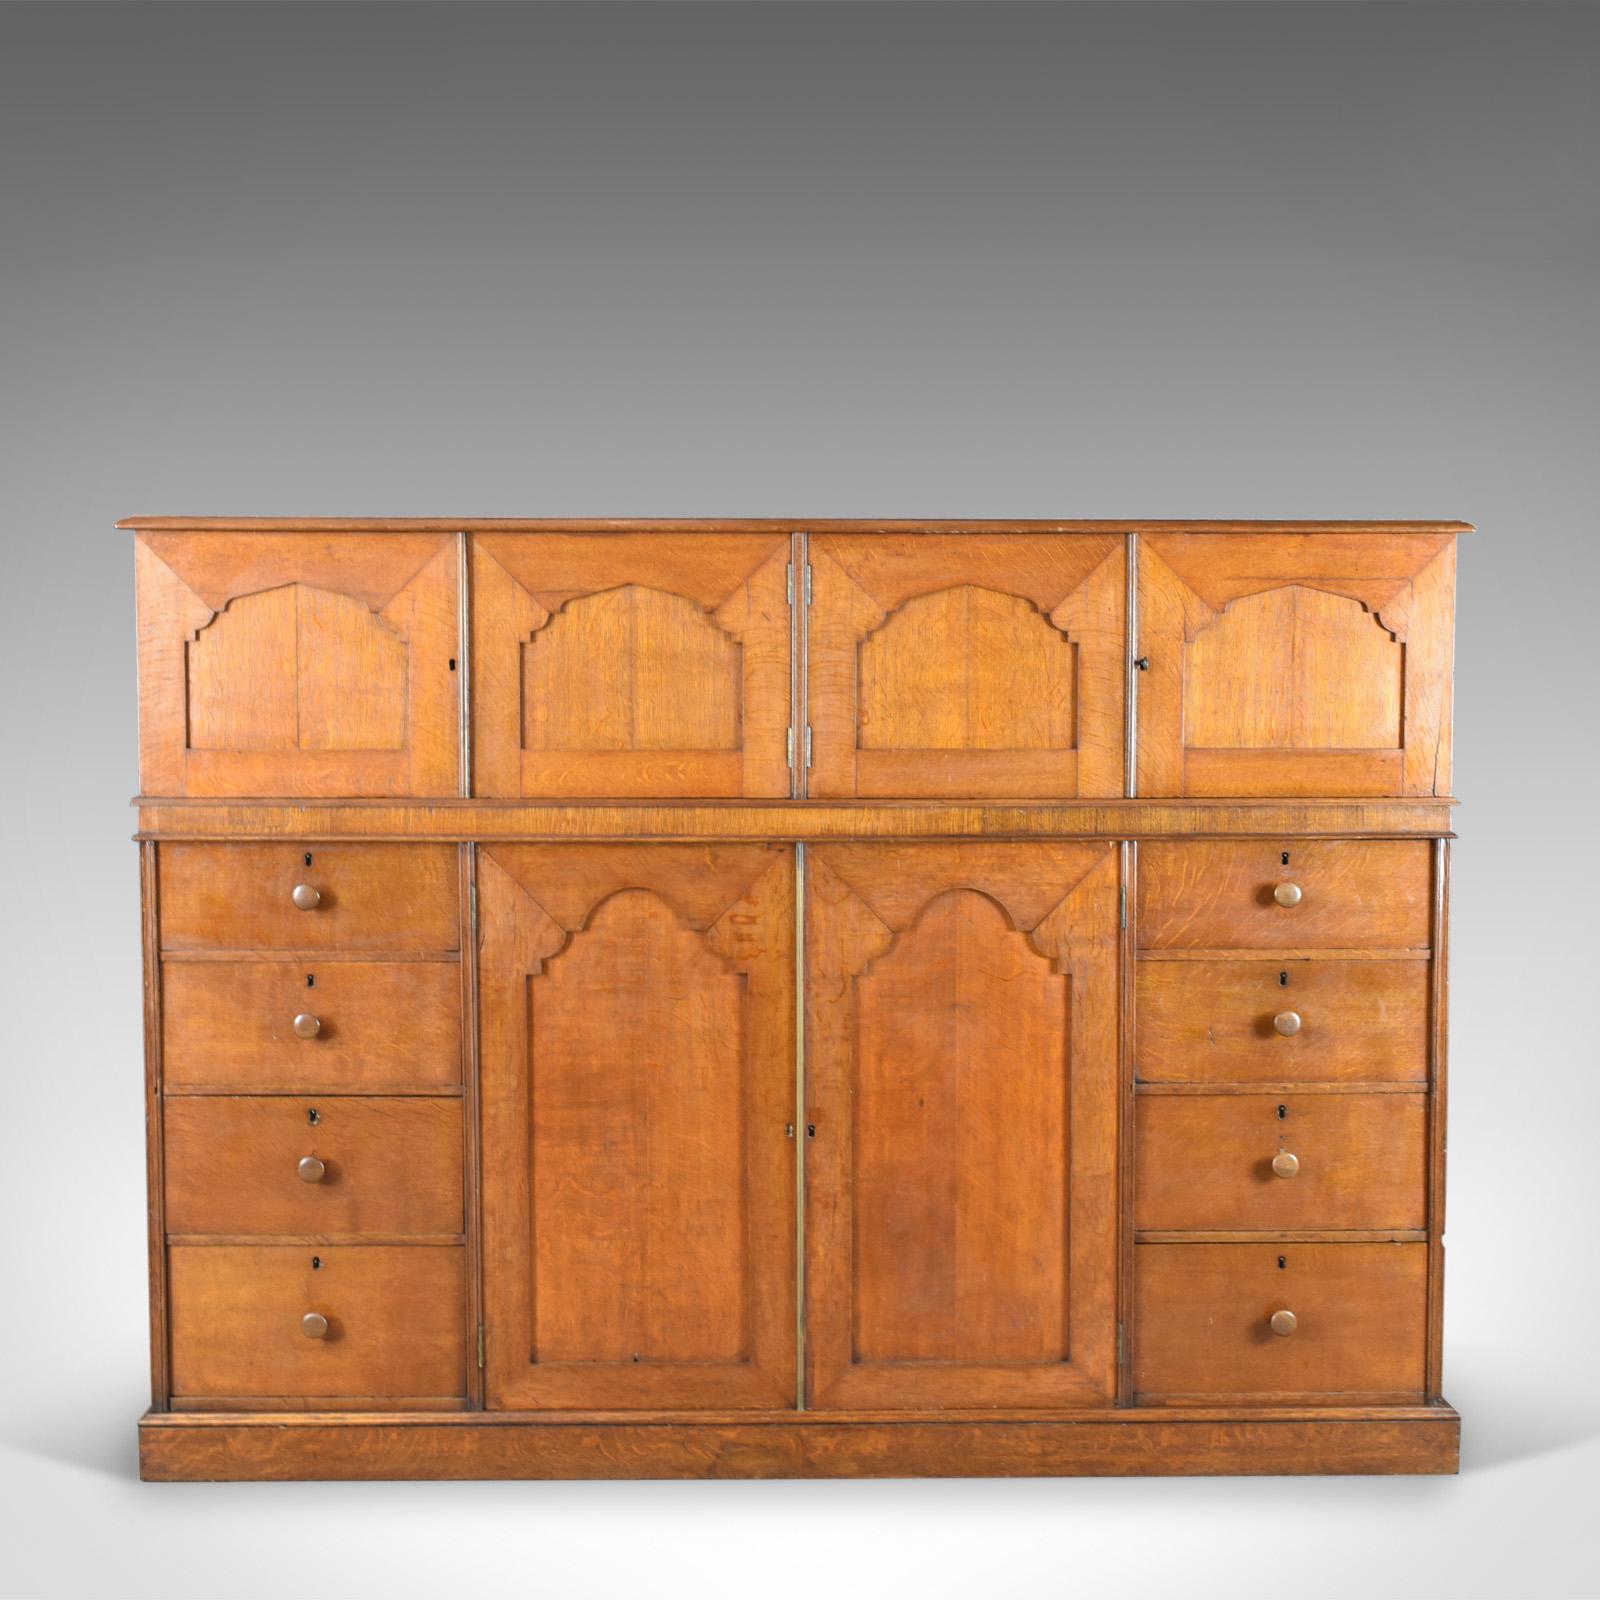 This is a large antique estate manager's cupboard in oak. An English, Victorian cabinet of country house proportions dating to the late 19th century, circa 1880.

A super piece of English estate furniture
The quarter sawn oak displaying wisps of